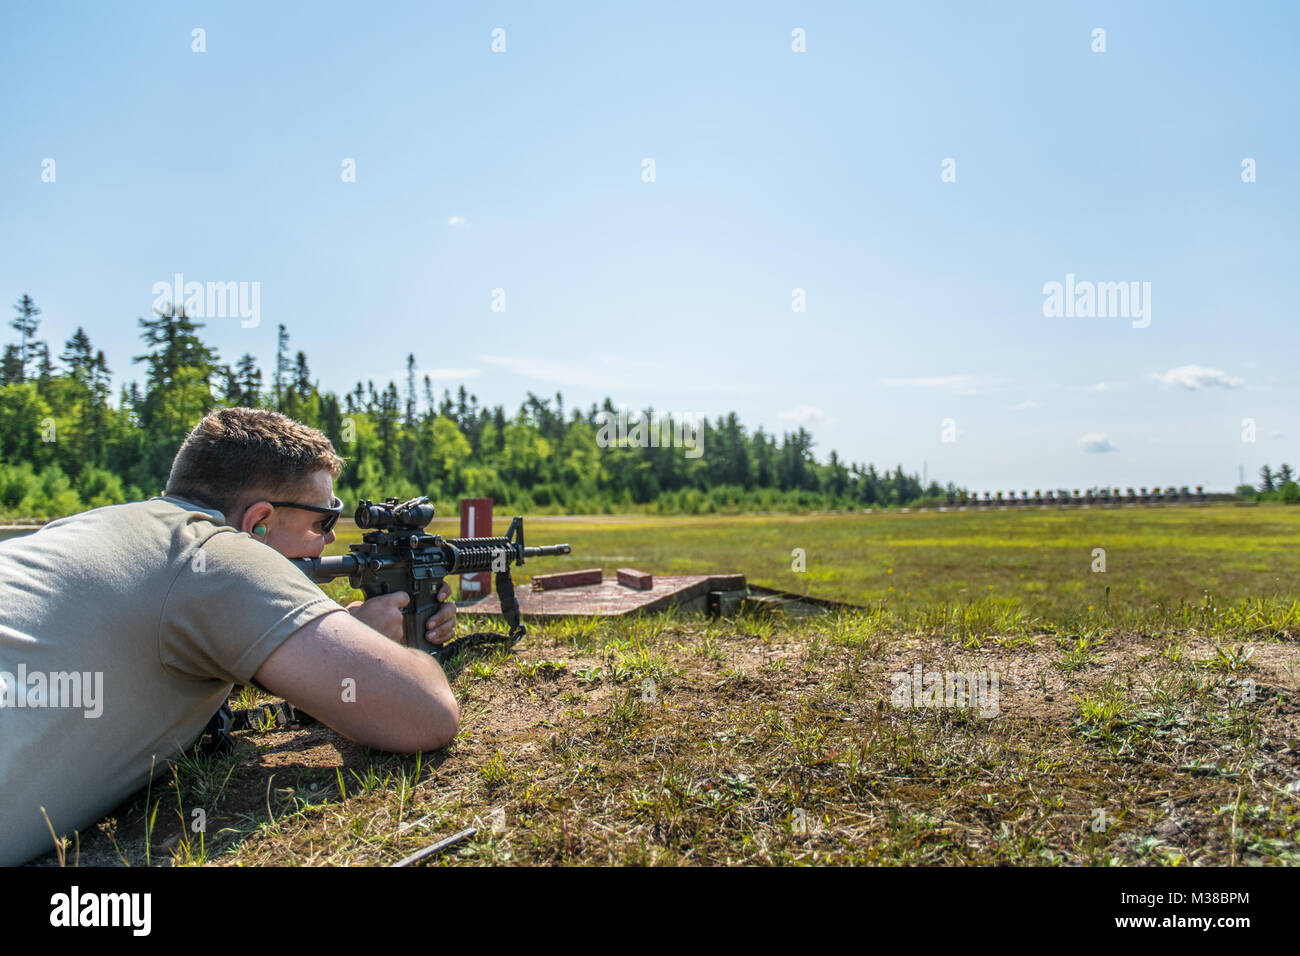 Spc. Ian May a combat engineer with the 251st Engineer Company (Sapper) takes aim with his M4 Carbine during a stress shoot at Canadian Forces Base Gagetown in New Brunswick, Canada,  August 14th, 2017. The stress shoot combined long distance target engagement with physically fatiguing tasks while being timed. “Soldiers need to understand that when your actually under stress a lot of things change, your hear rate, your breathing, everything changes and it makes it a lot more difficult to hit your target,” said Spc. Jeffery Waters a combat engineer with the 251st and the marksmanship subject ma Stock Photo